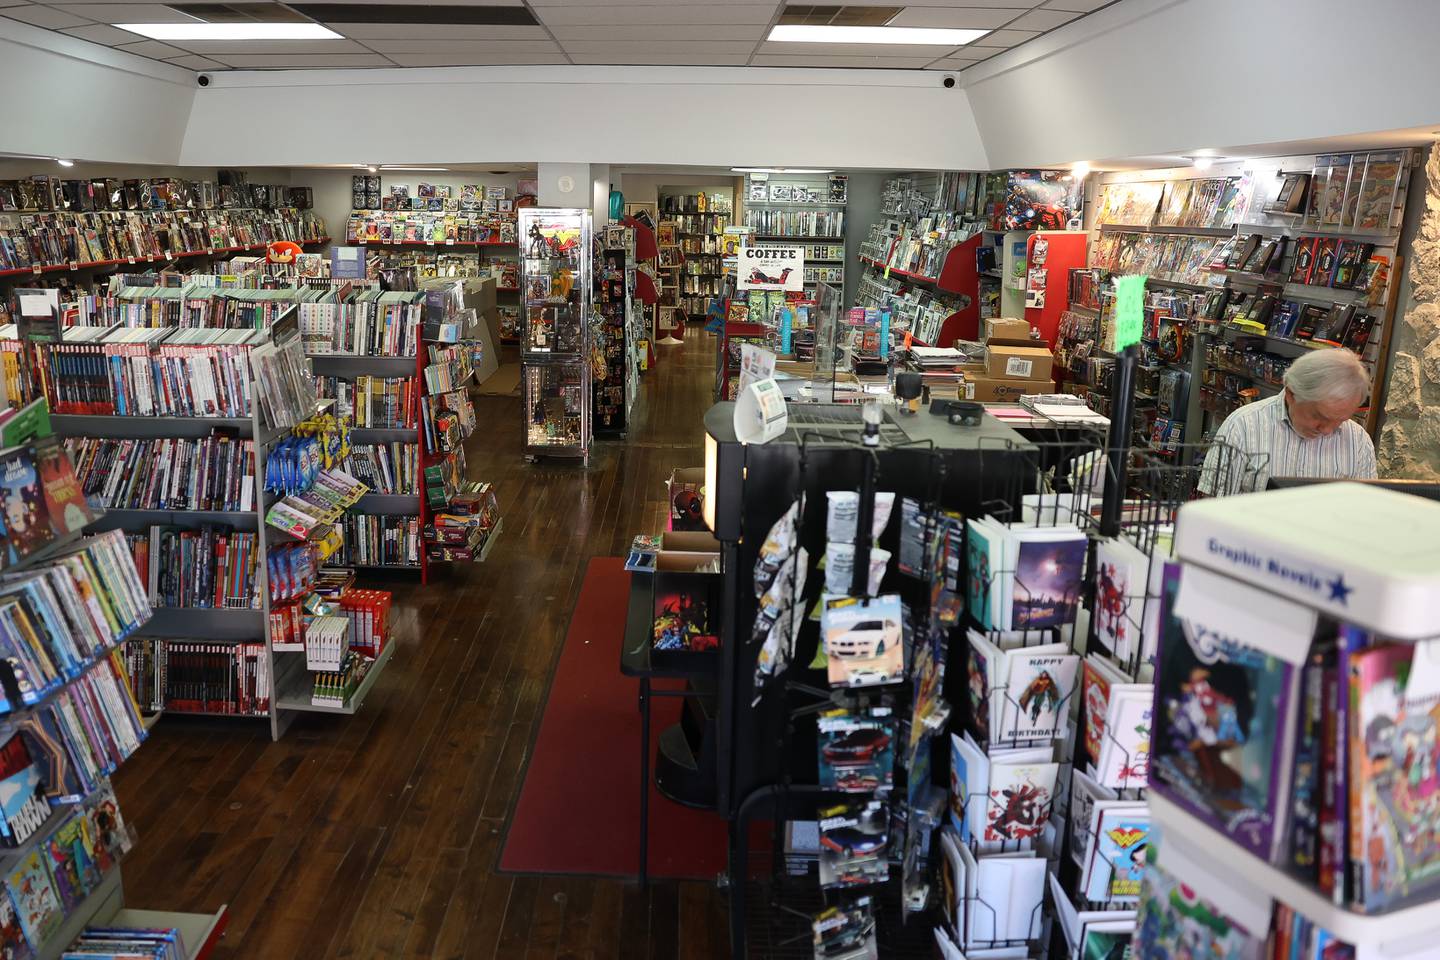 Amazing Fantasy Comics is a staple store along East 9th Street in downtown Lockport.